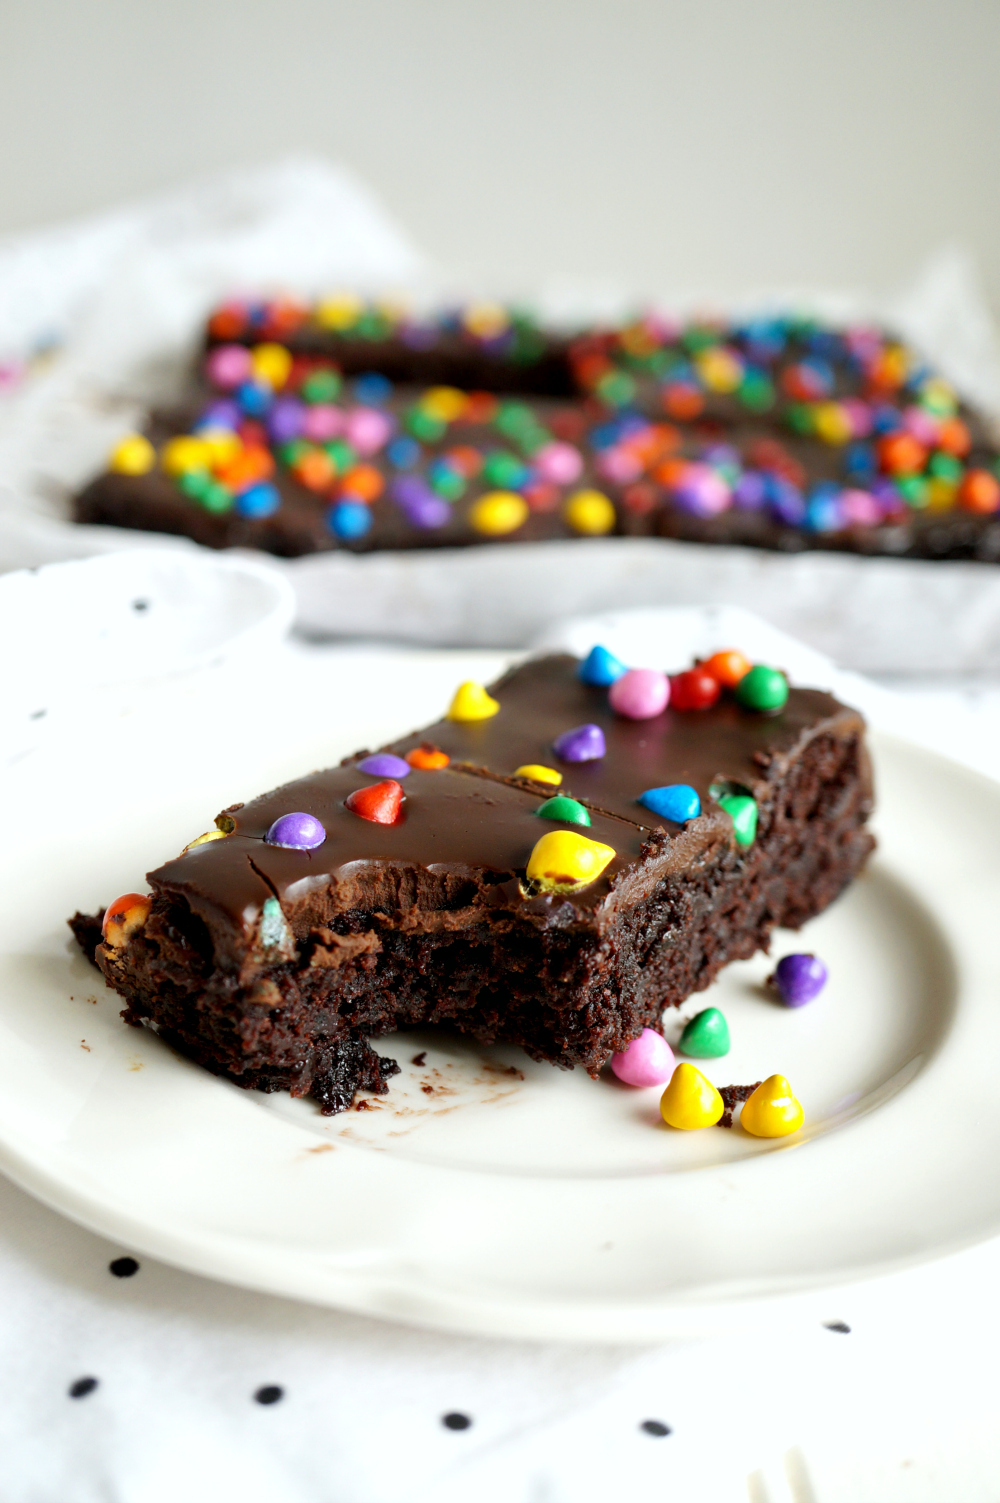 homemade cosmic brownie with a bite